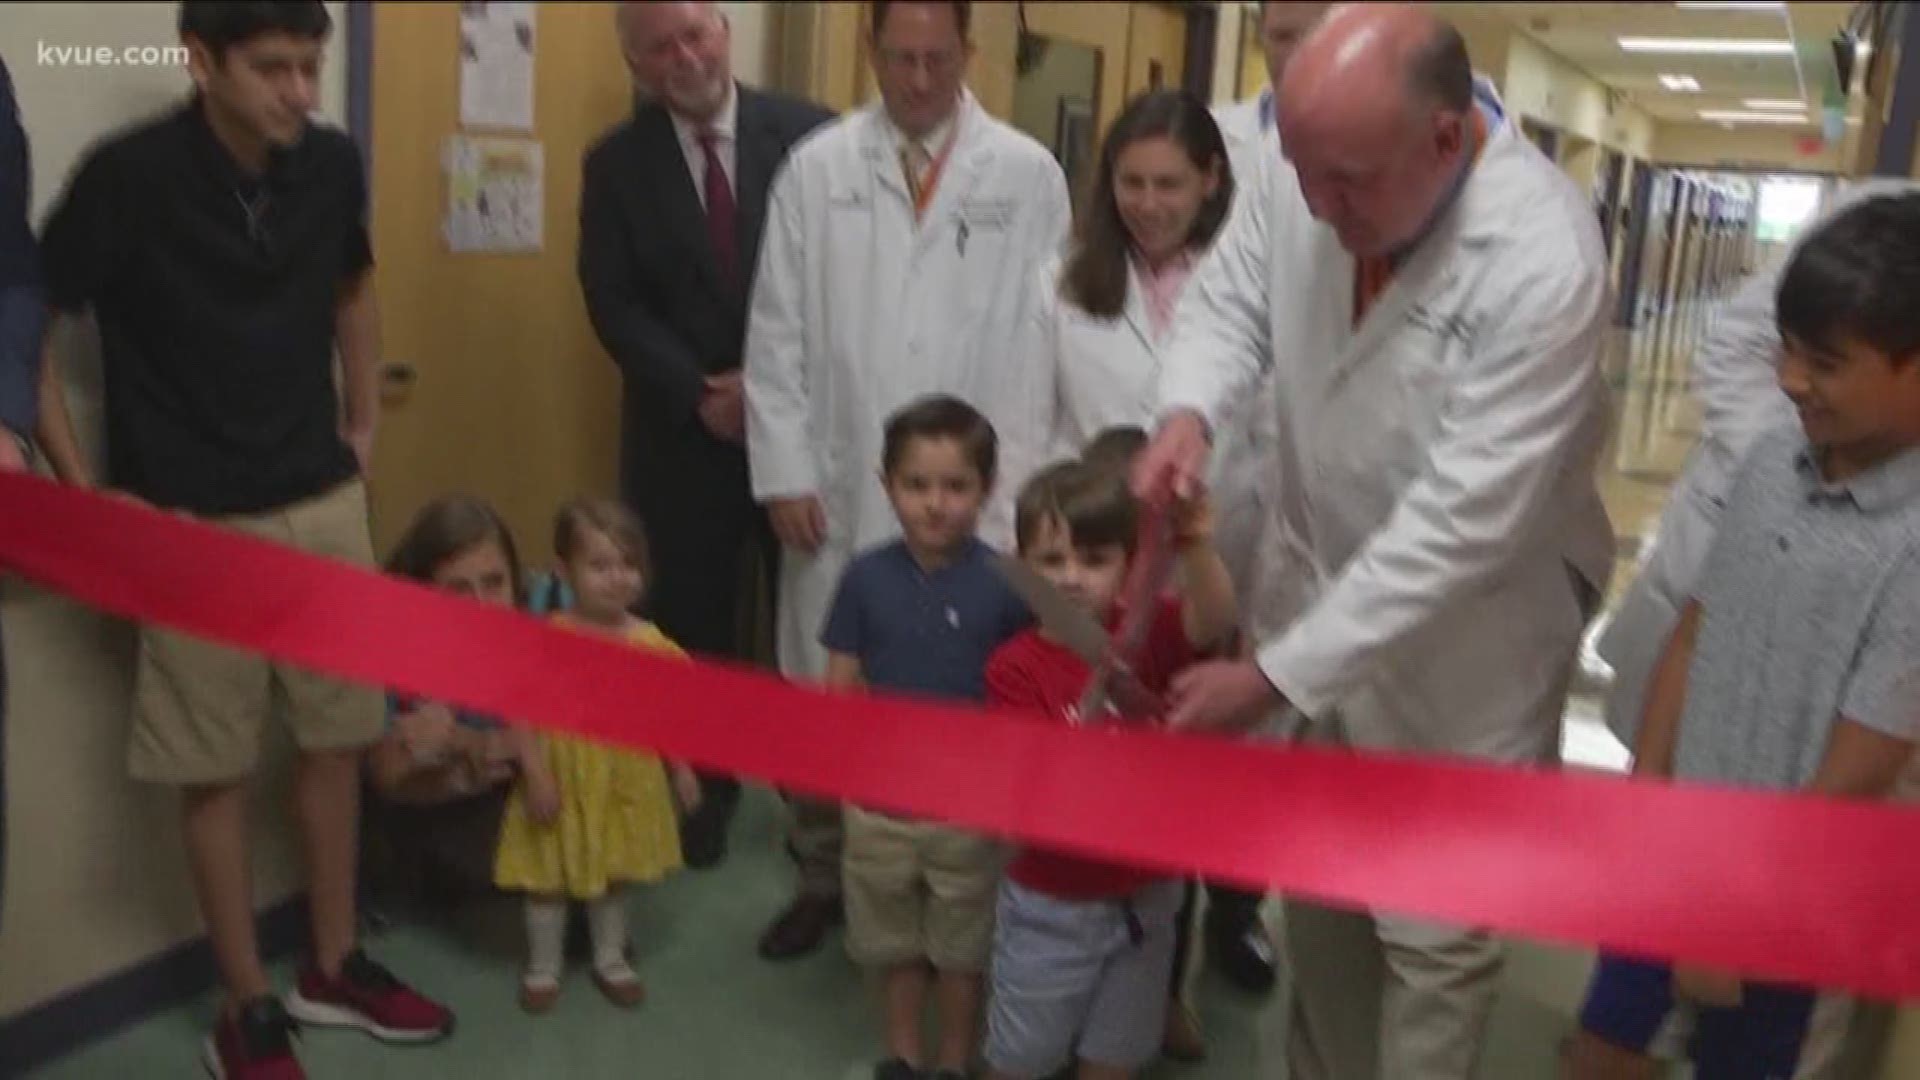 Dell Children's opened the first dedicated pediatric cardiac care unit in Central Texas.